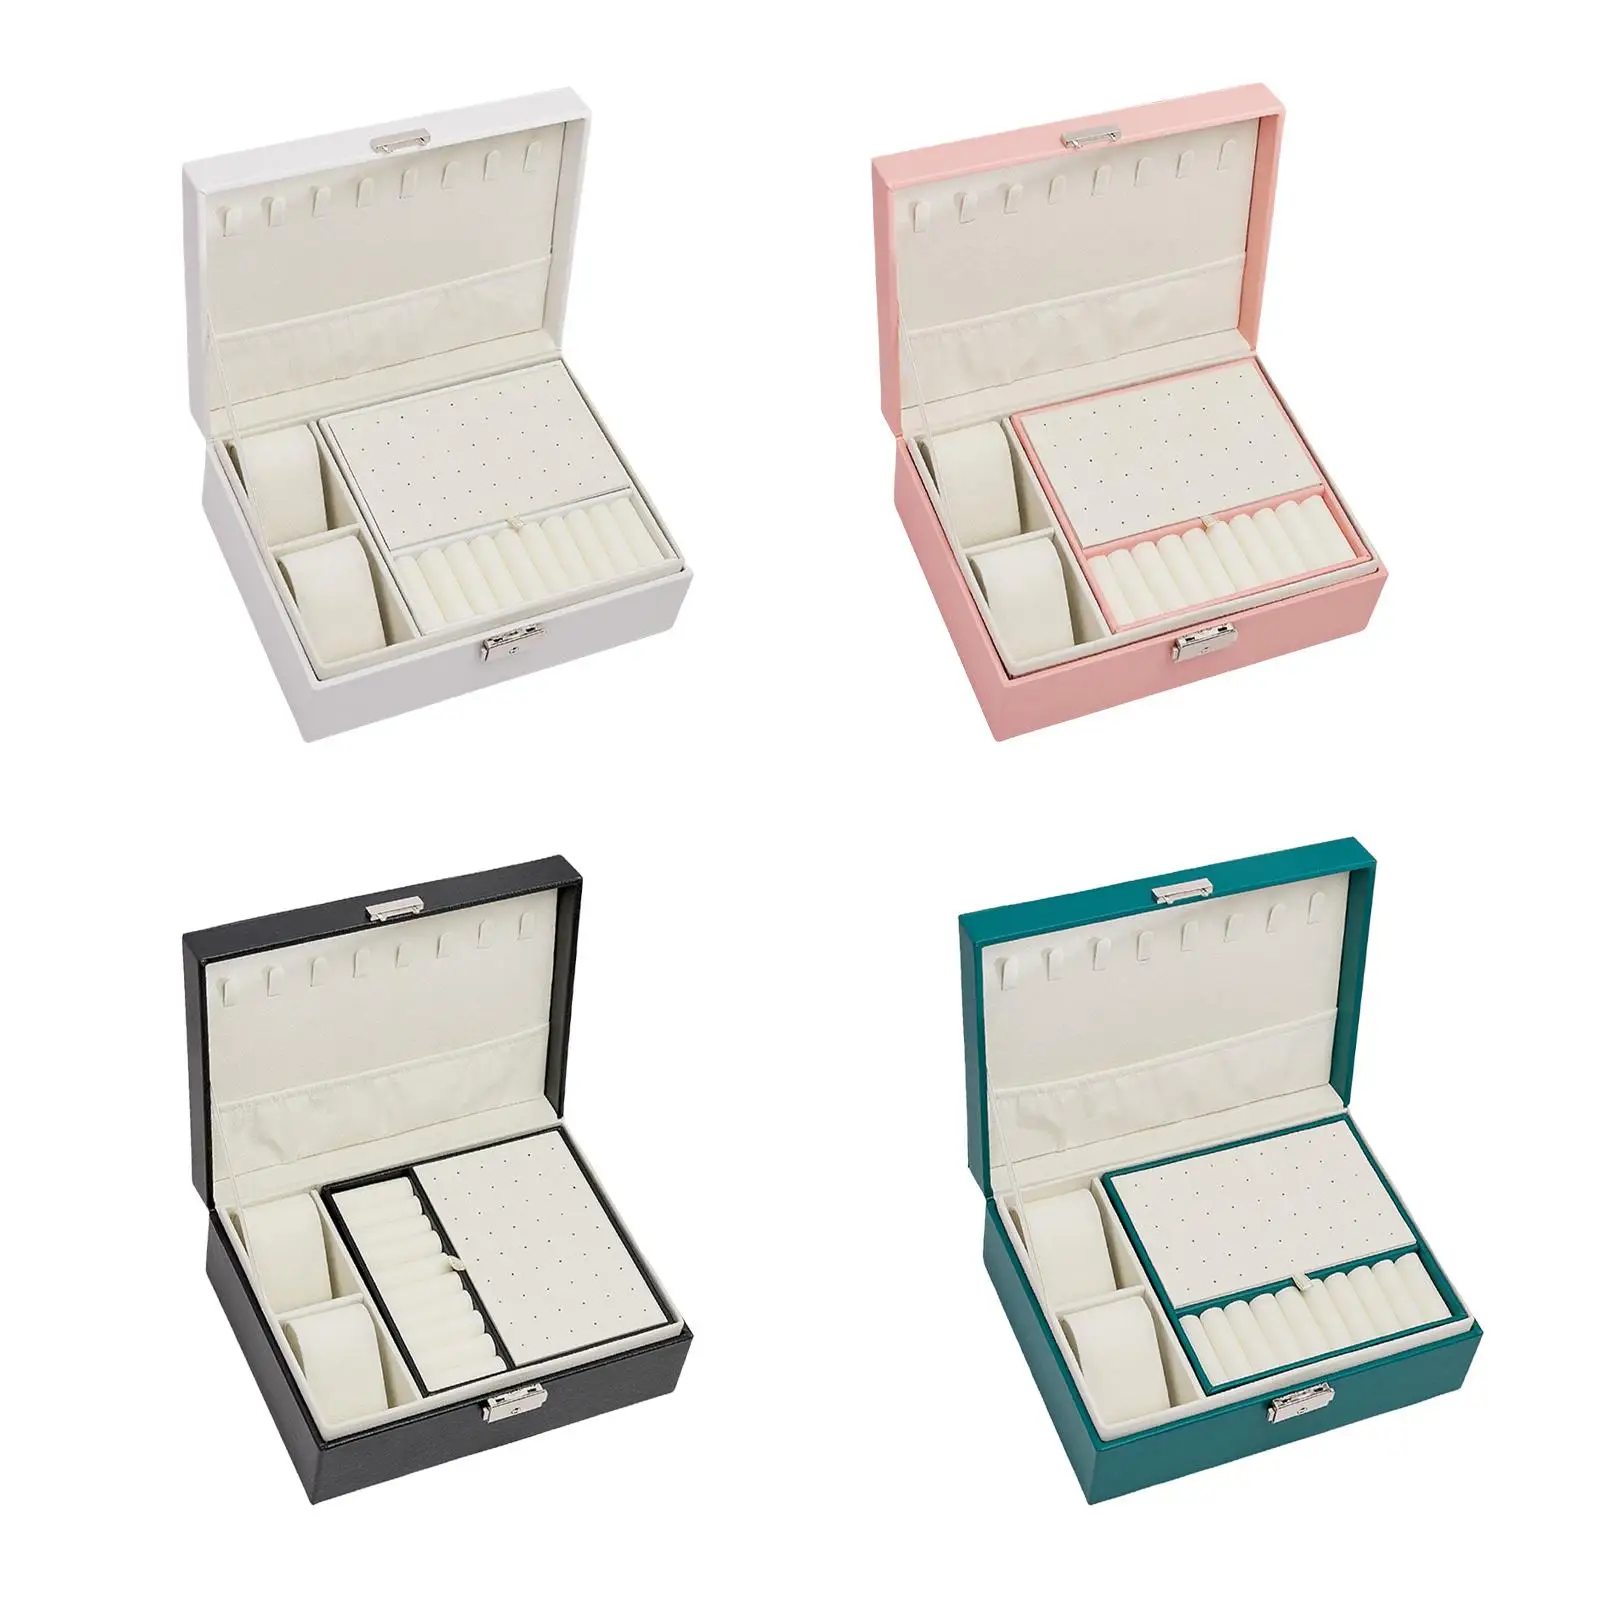 

Multi Layer Jewelry Box Removable Dividers Portable Exquisite Large Space Creative Holder Storage Case for Watch Bracelet Studs